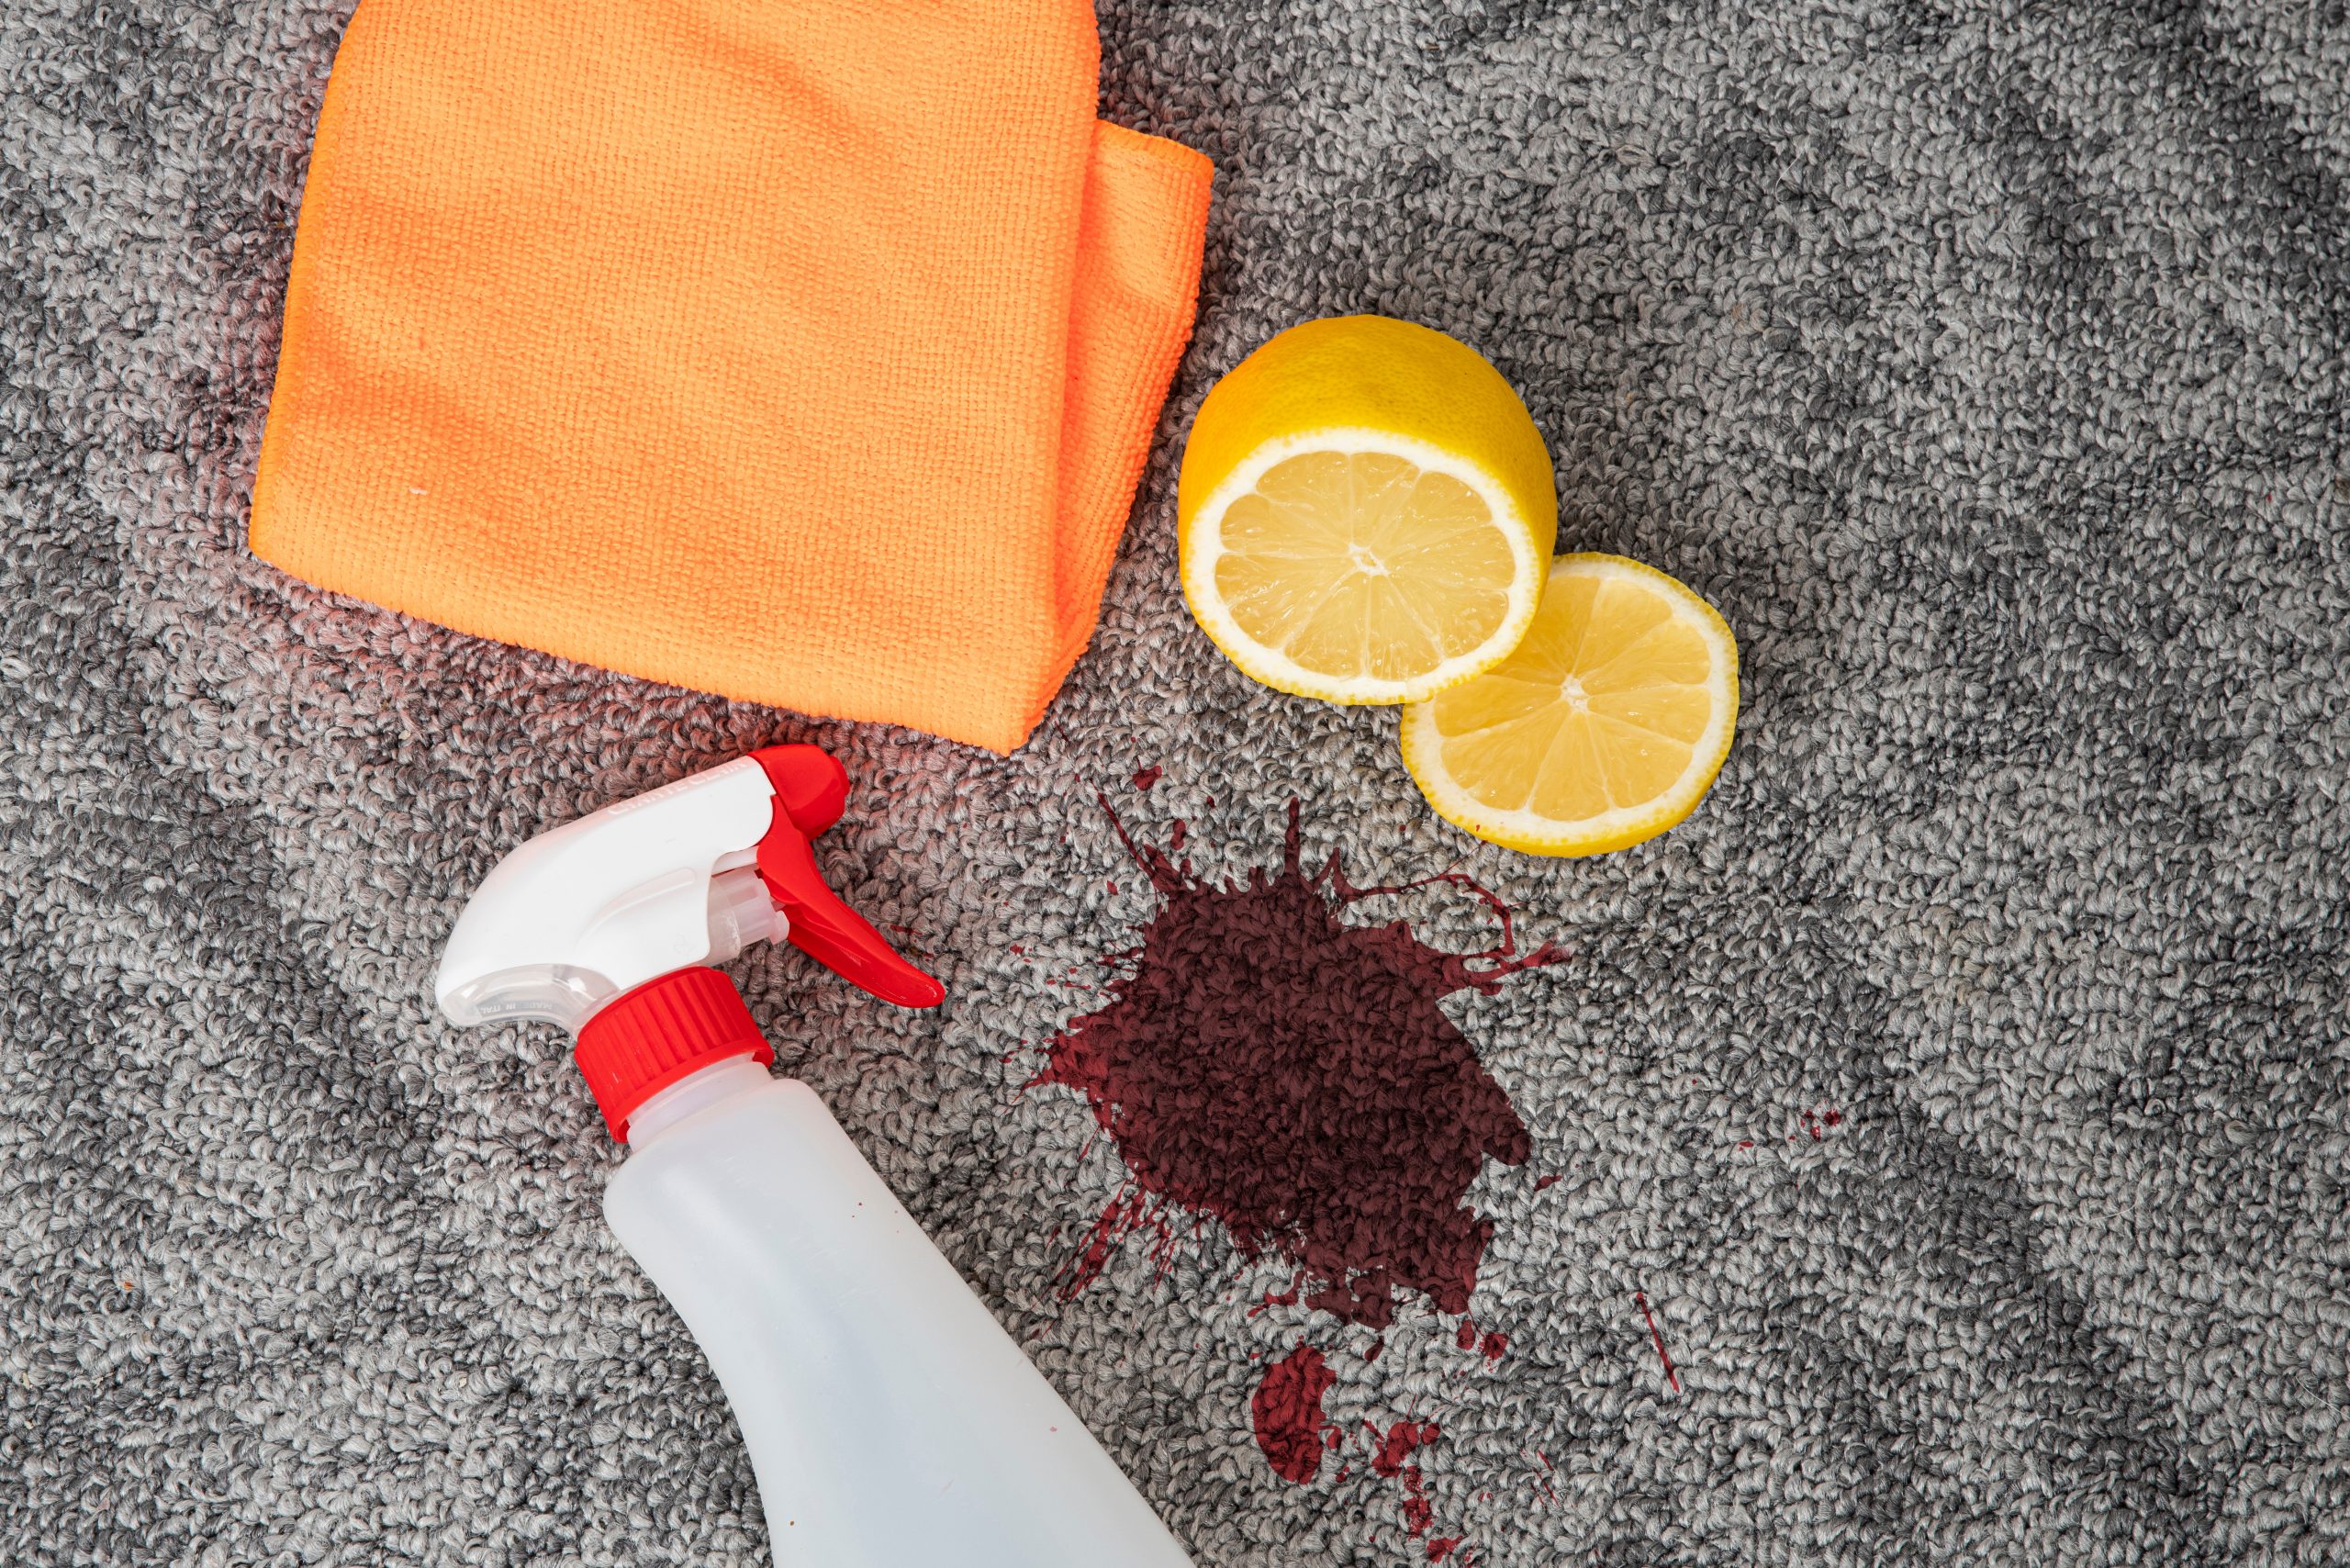 Dark stain, dirty spot on a carpeted floor, cleaning cloth, stain remover spray, Lemon for natural cleansing. Grey carpet needs cleaning and pollution removal.